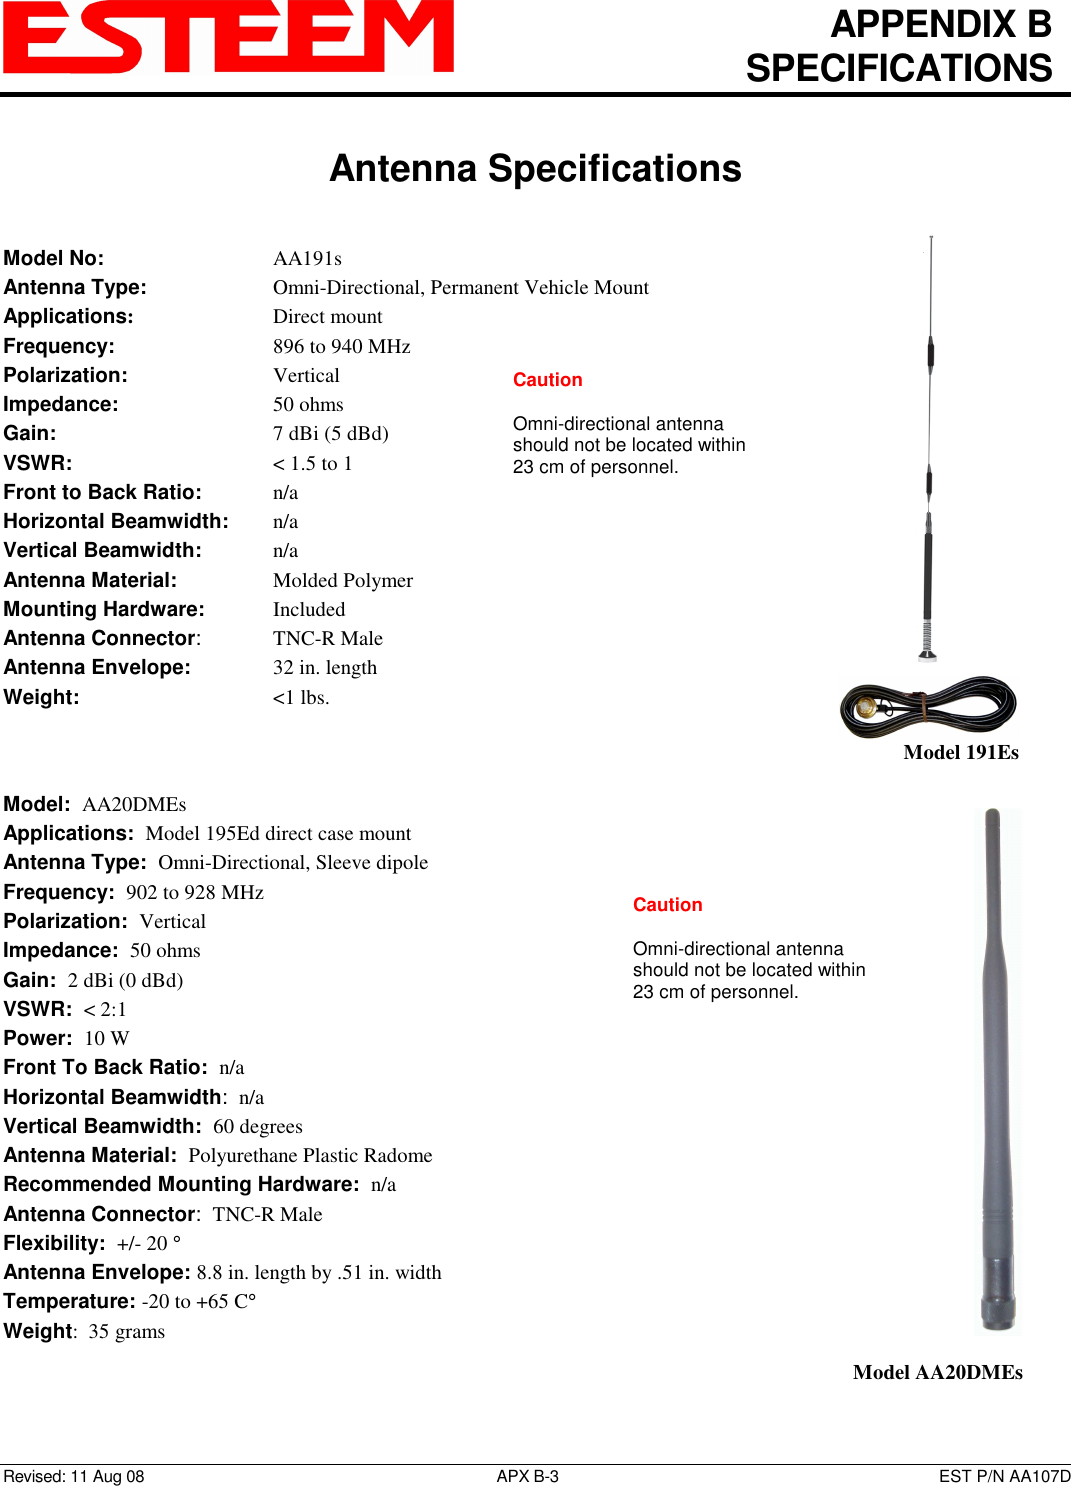   APPENDIX B   SPECIFICATIONS   Antenna Specifications   Revised: 11 Aug 08  APX B-3  EST P/N AA107D Model No:        AA191s Antenna Type:      Omni-Directional, Permanent Vehicle Mount Applications:       Direct mount Frequency:        896 to 940 MHz  Polarization:        Vertical Impedance:        50 ohms Gain:          7 dBi (5 dBd) VSWR:          &lt; 1.5 to 1 Front to Back Ratio:    n/a Horizontal Beamwidth:  n/a Vertical Beamwidth:     n/a Antenna Material:     Molded Polymer  Mounting Hardware:    Included  Antenna Connector:    TNC-R Male Antenna Envelope:    32 in. length Weight:           &lt;1 lbs.     Model:  AA20DMEs  Applications:  Model 195Ed direct case mount Antenna Type:  Omni-Directional, Sleeve dipole Frequency:  902 to 928 MHz Polarization:  Vertical Impedance:  50 ohms Gain:  2 dBi (0 dBd) VSWR:  &lt; 2:1  Power:  10 W  Front To Back Ratio:  n/a Horizontal Beamwidth:  n/a Vertical Beamwidth:  60 degrees Antenna Material:  Polyurethane Plastic Radome  Recommended Mounting Hardware:  n/a Antenna Connector:  TNC-R Male  Flexibility:  +/- 20 °  Antenna Envelope: 8.8 in. length by .51 in. width Temperature: -20 to +65 C° Weight:  35 grams    Model 191Es    Model AA20DMEs Caution  Omni-directional antenna should not be located within 23 cm of personnel.  Caution  Omni-directional antenna should not be located within 23 cm of personnel.  